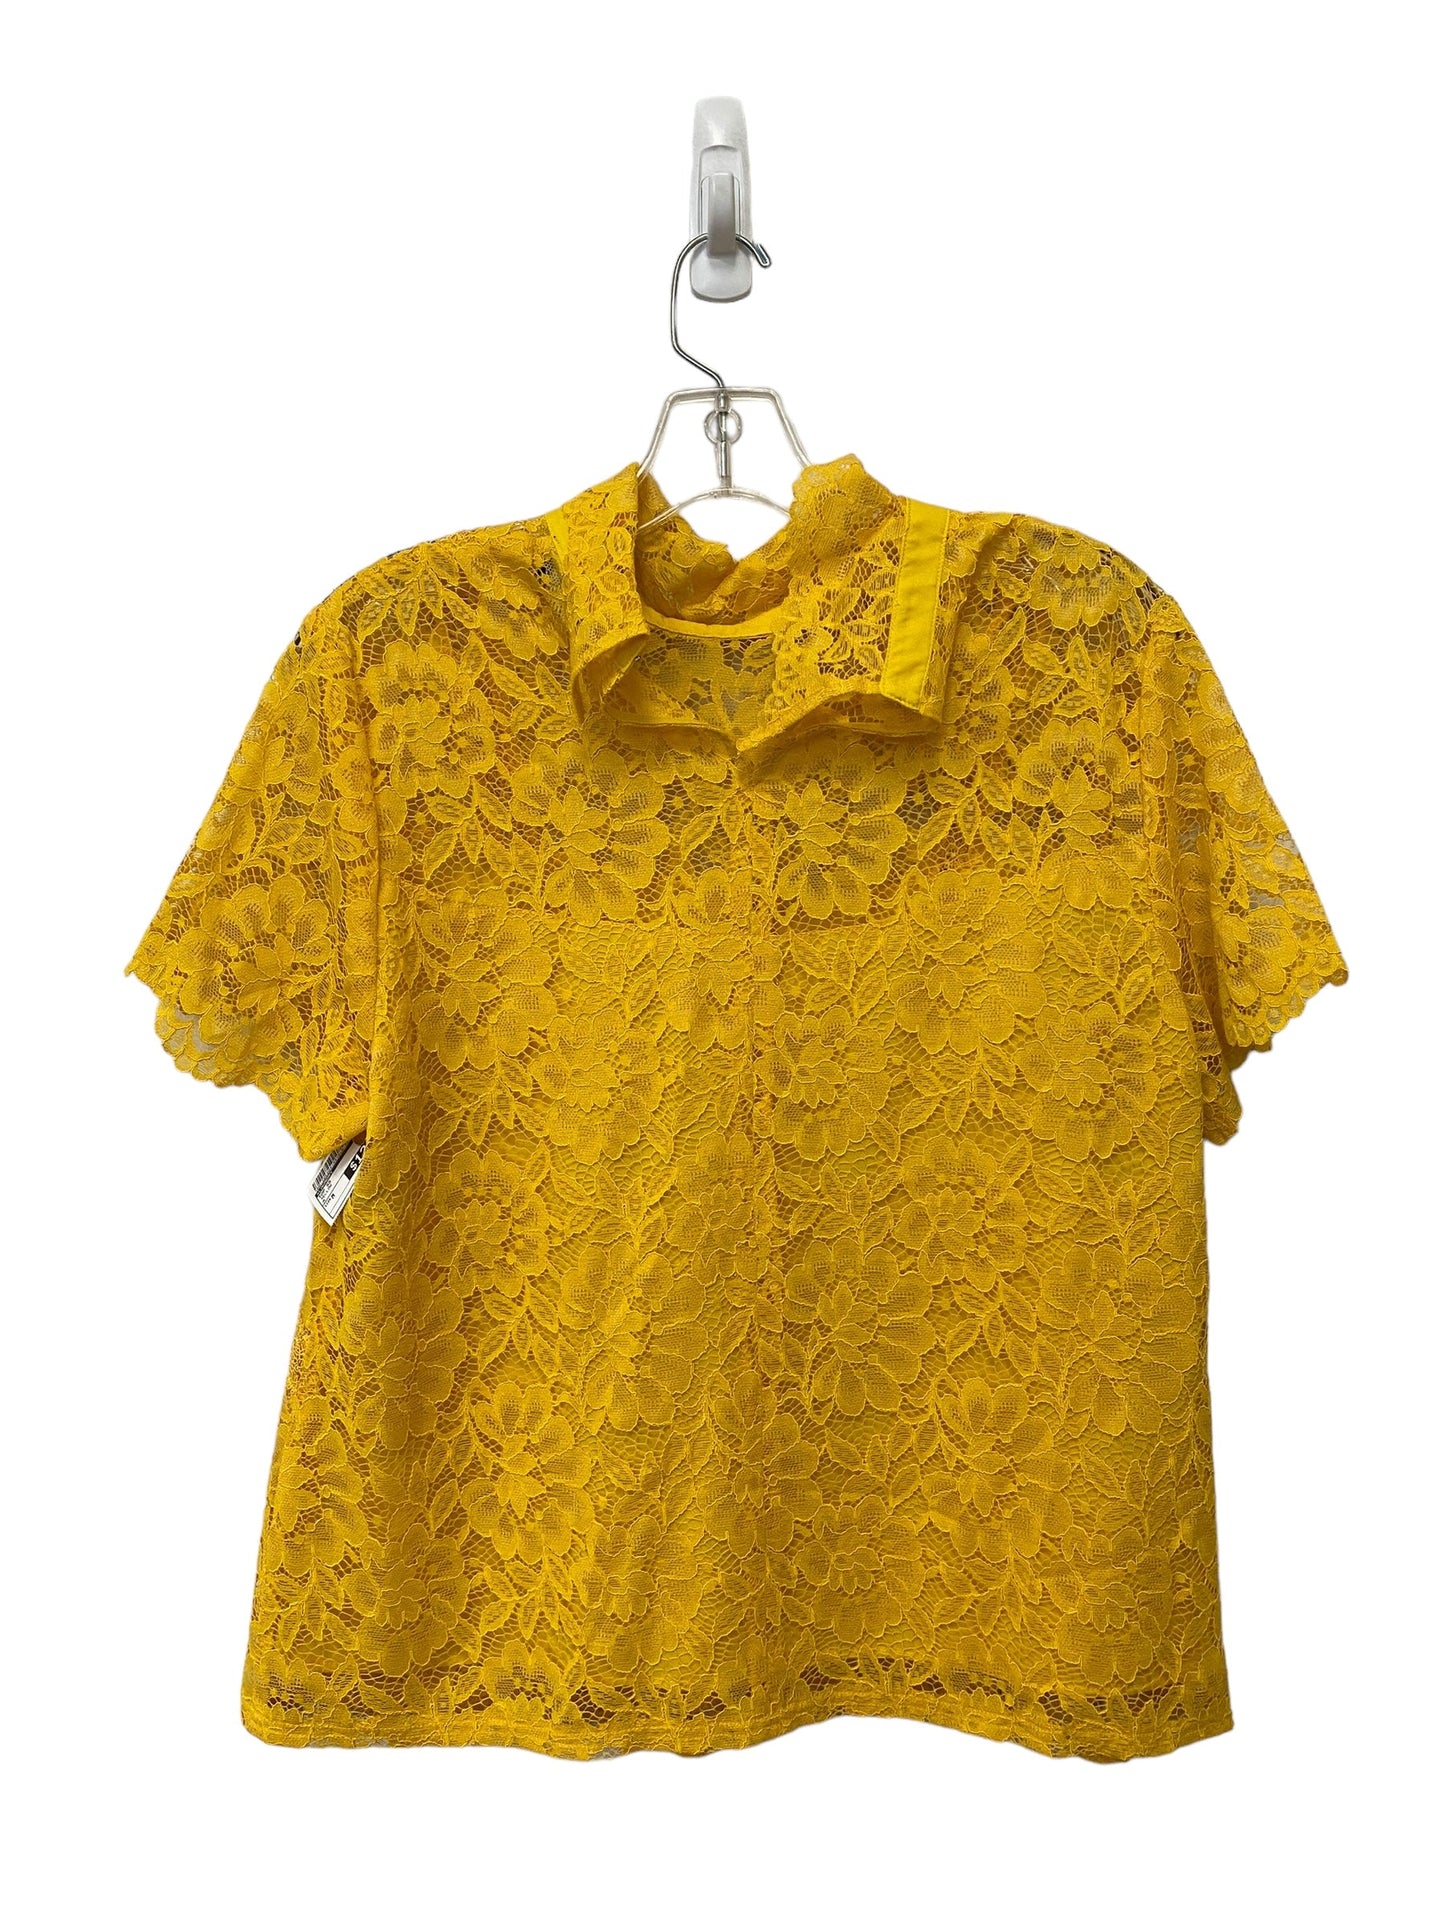 Yellow Top Short Sleeve Laundry, Size M